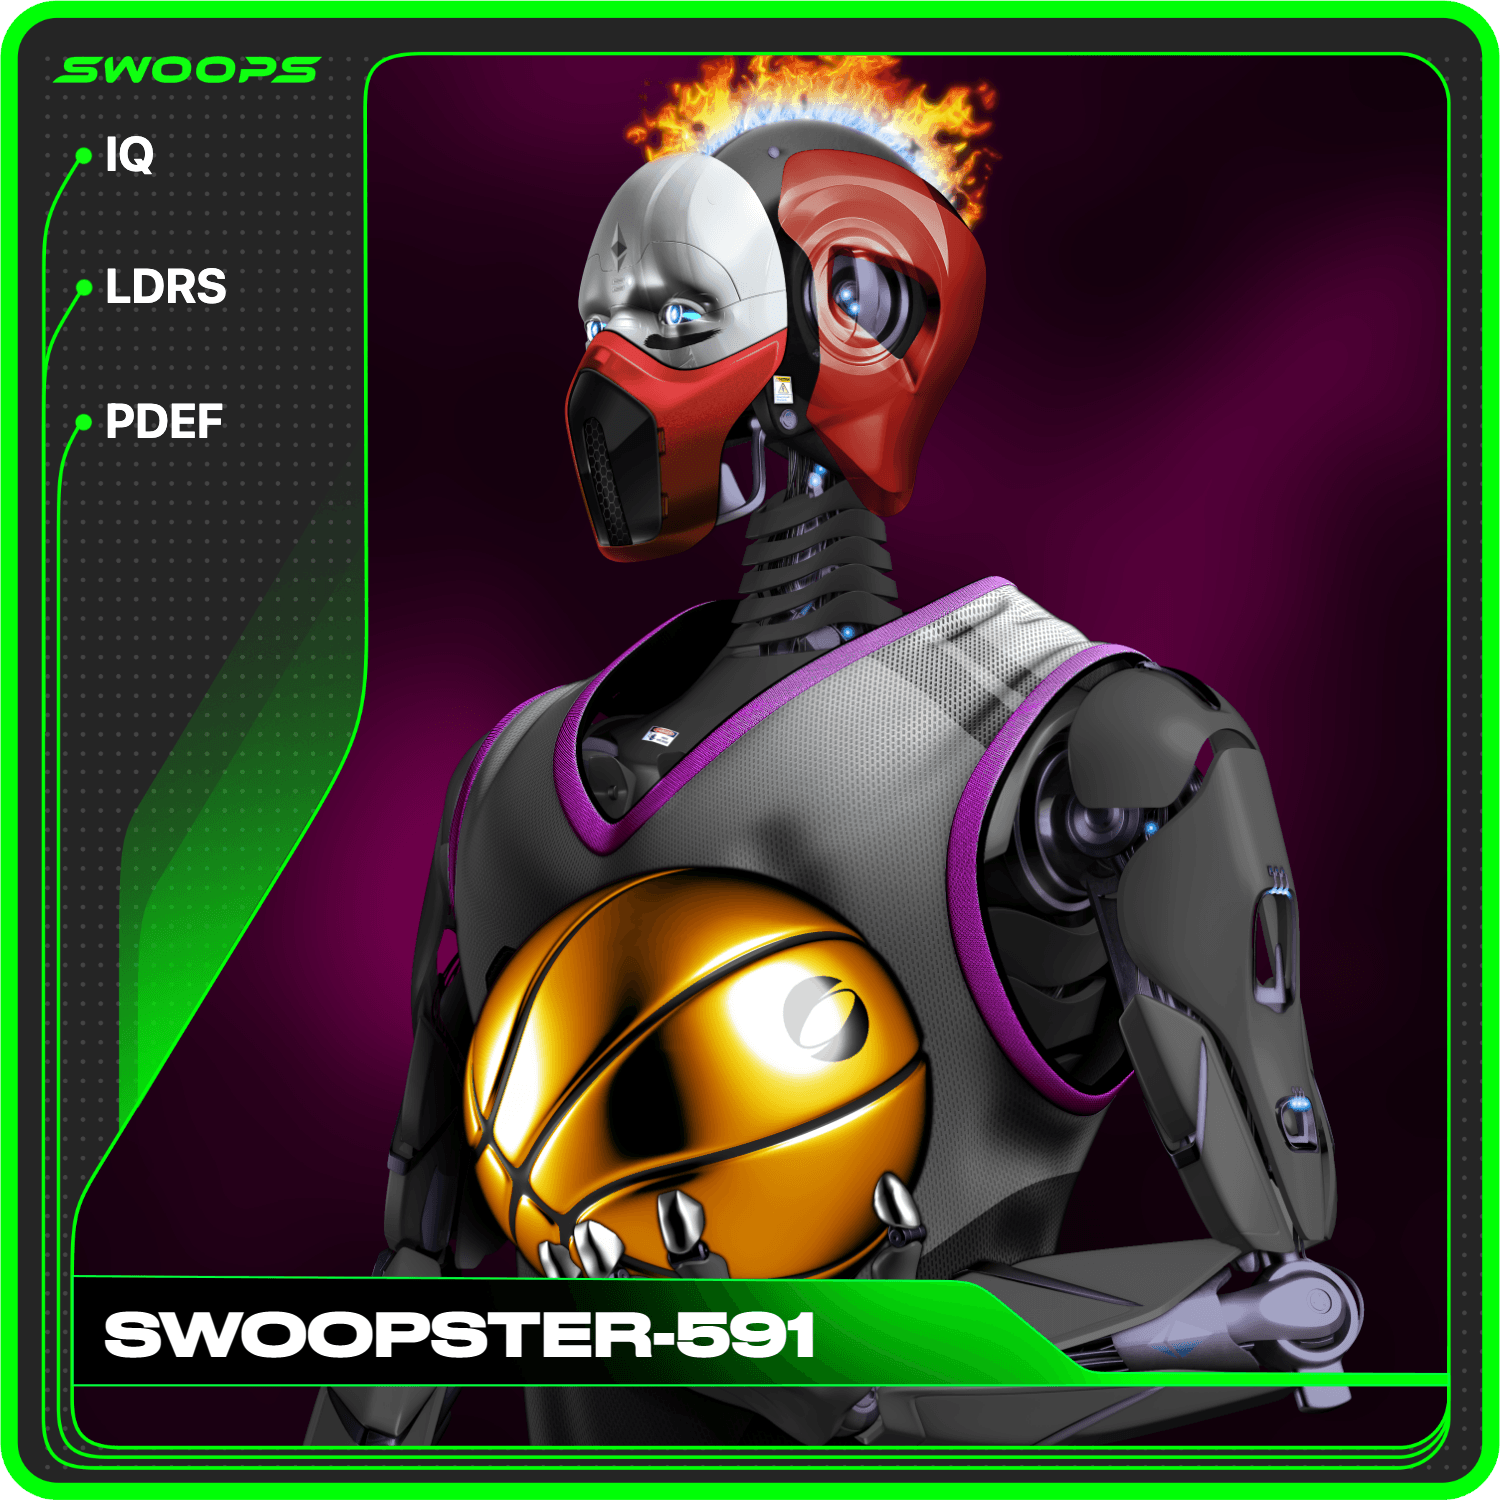 SWOOPSTER-591